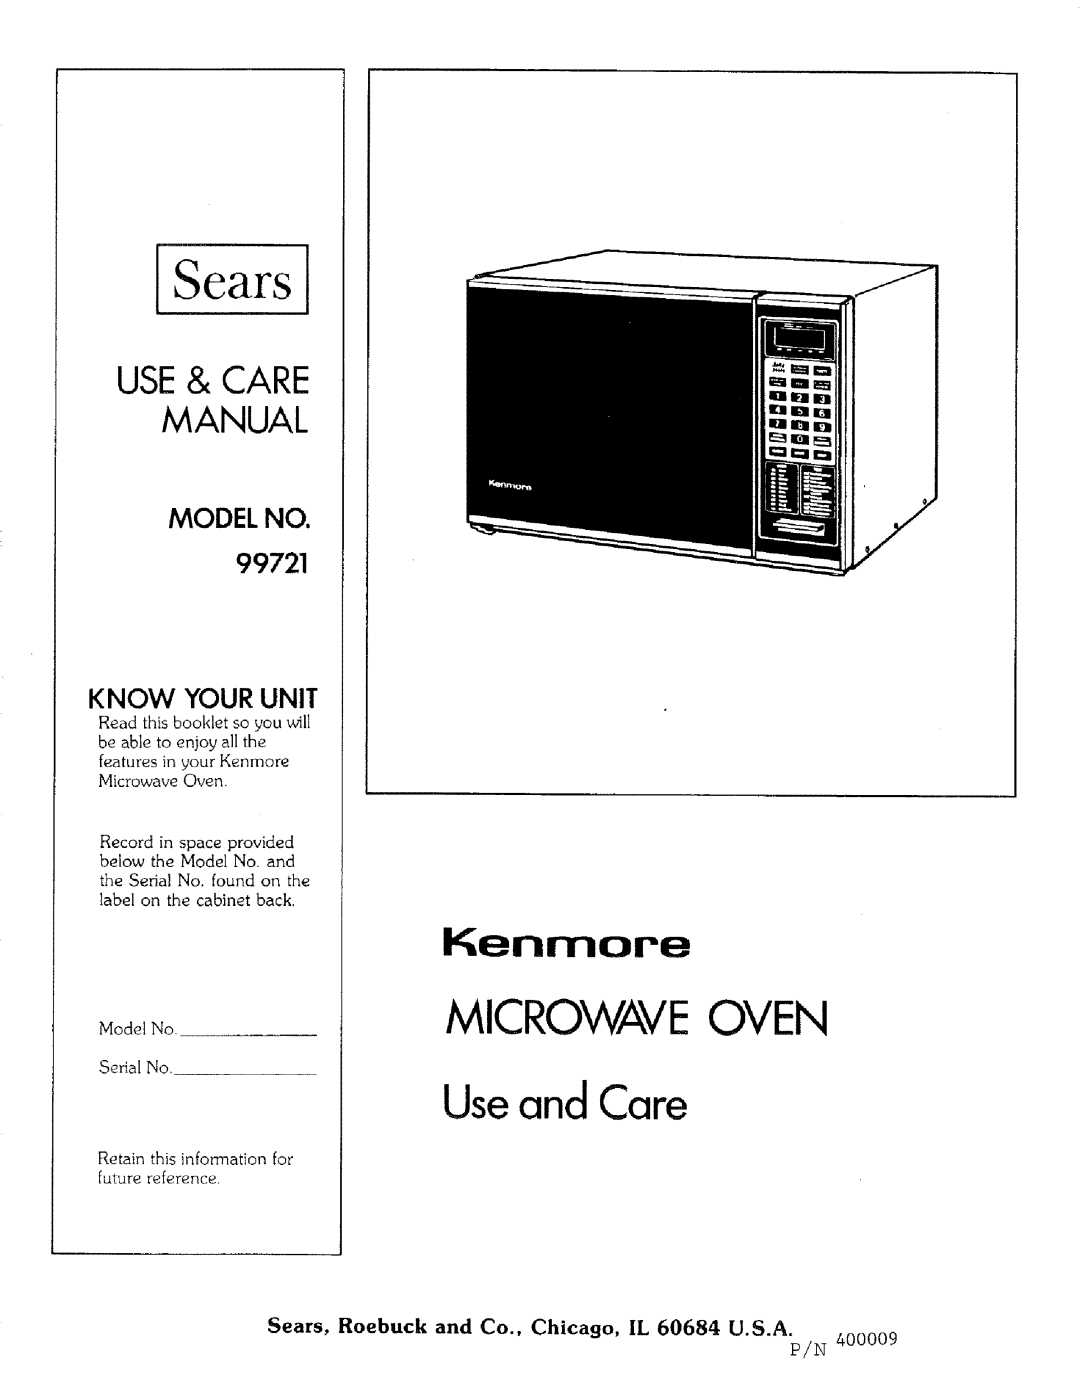 Kenmore 99721 manual Useand Care, Microwave Oven, Use & Care Manual, Model No, Know Your Unit, Kenmore 